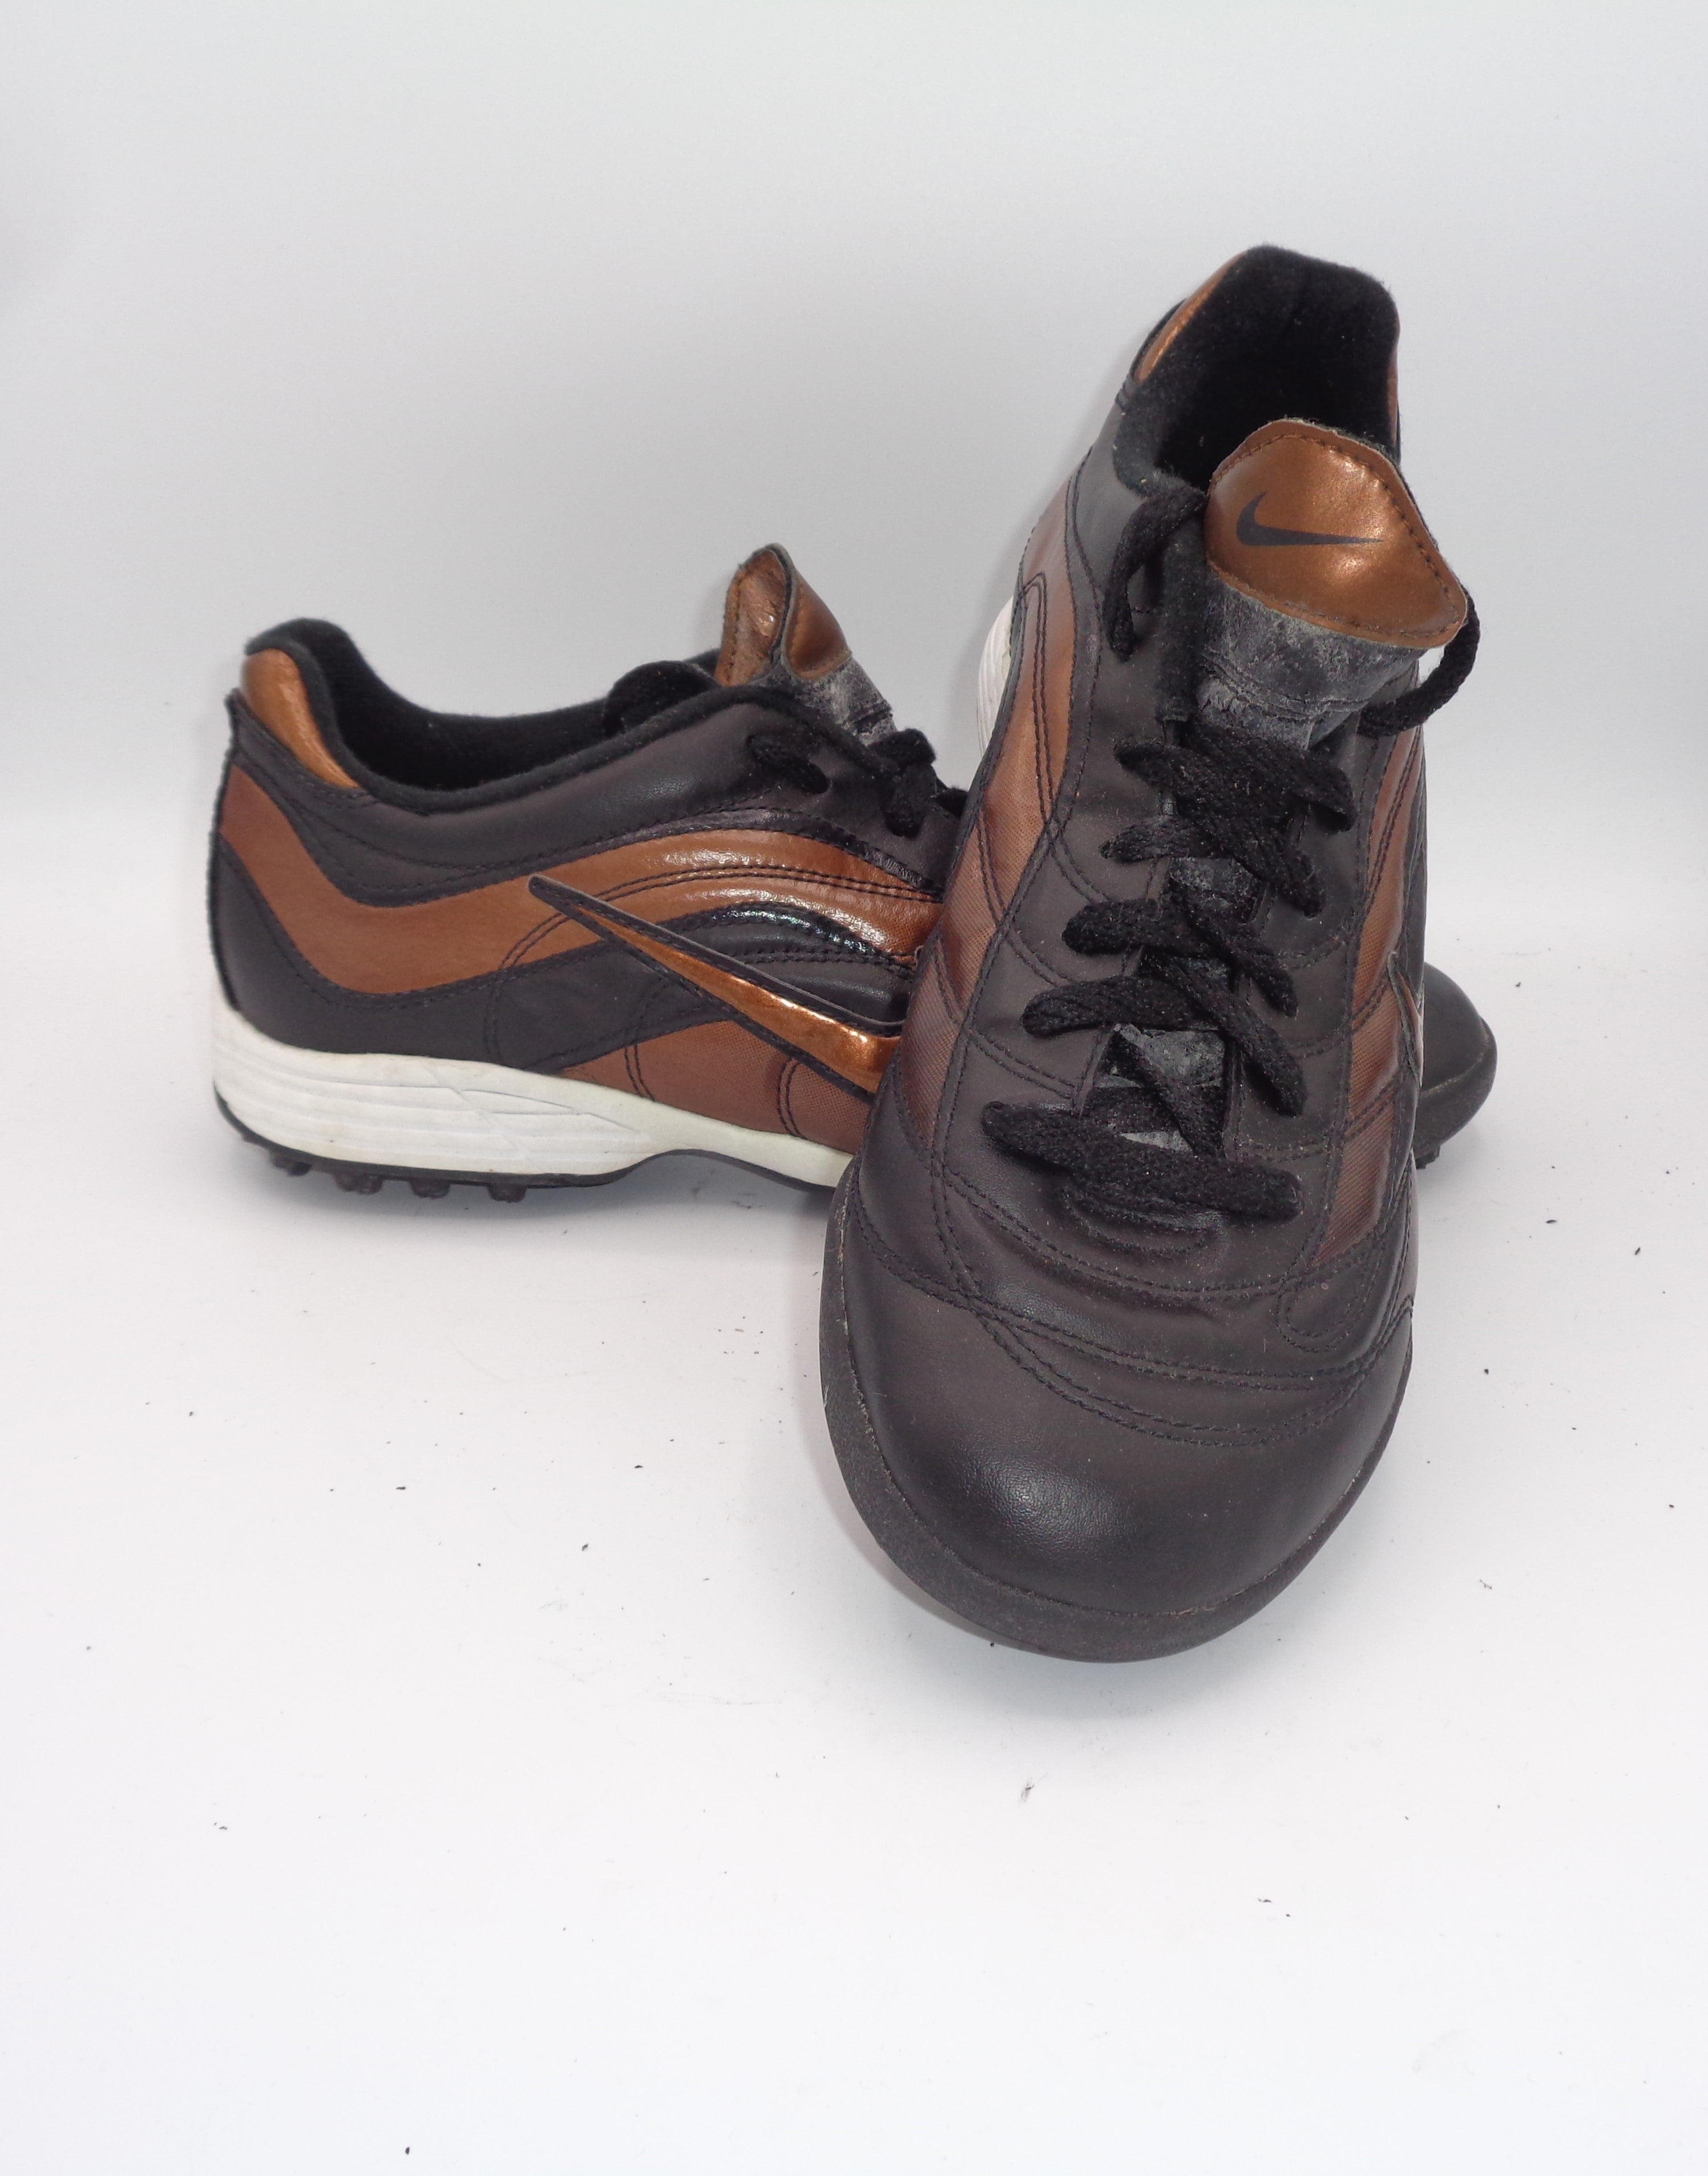 NIKE ASTRO FOOTBALL BOOTS BROWN BLACK - NIKE - SIZE 5